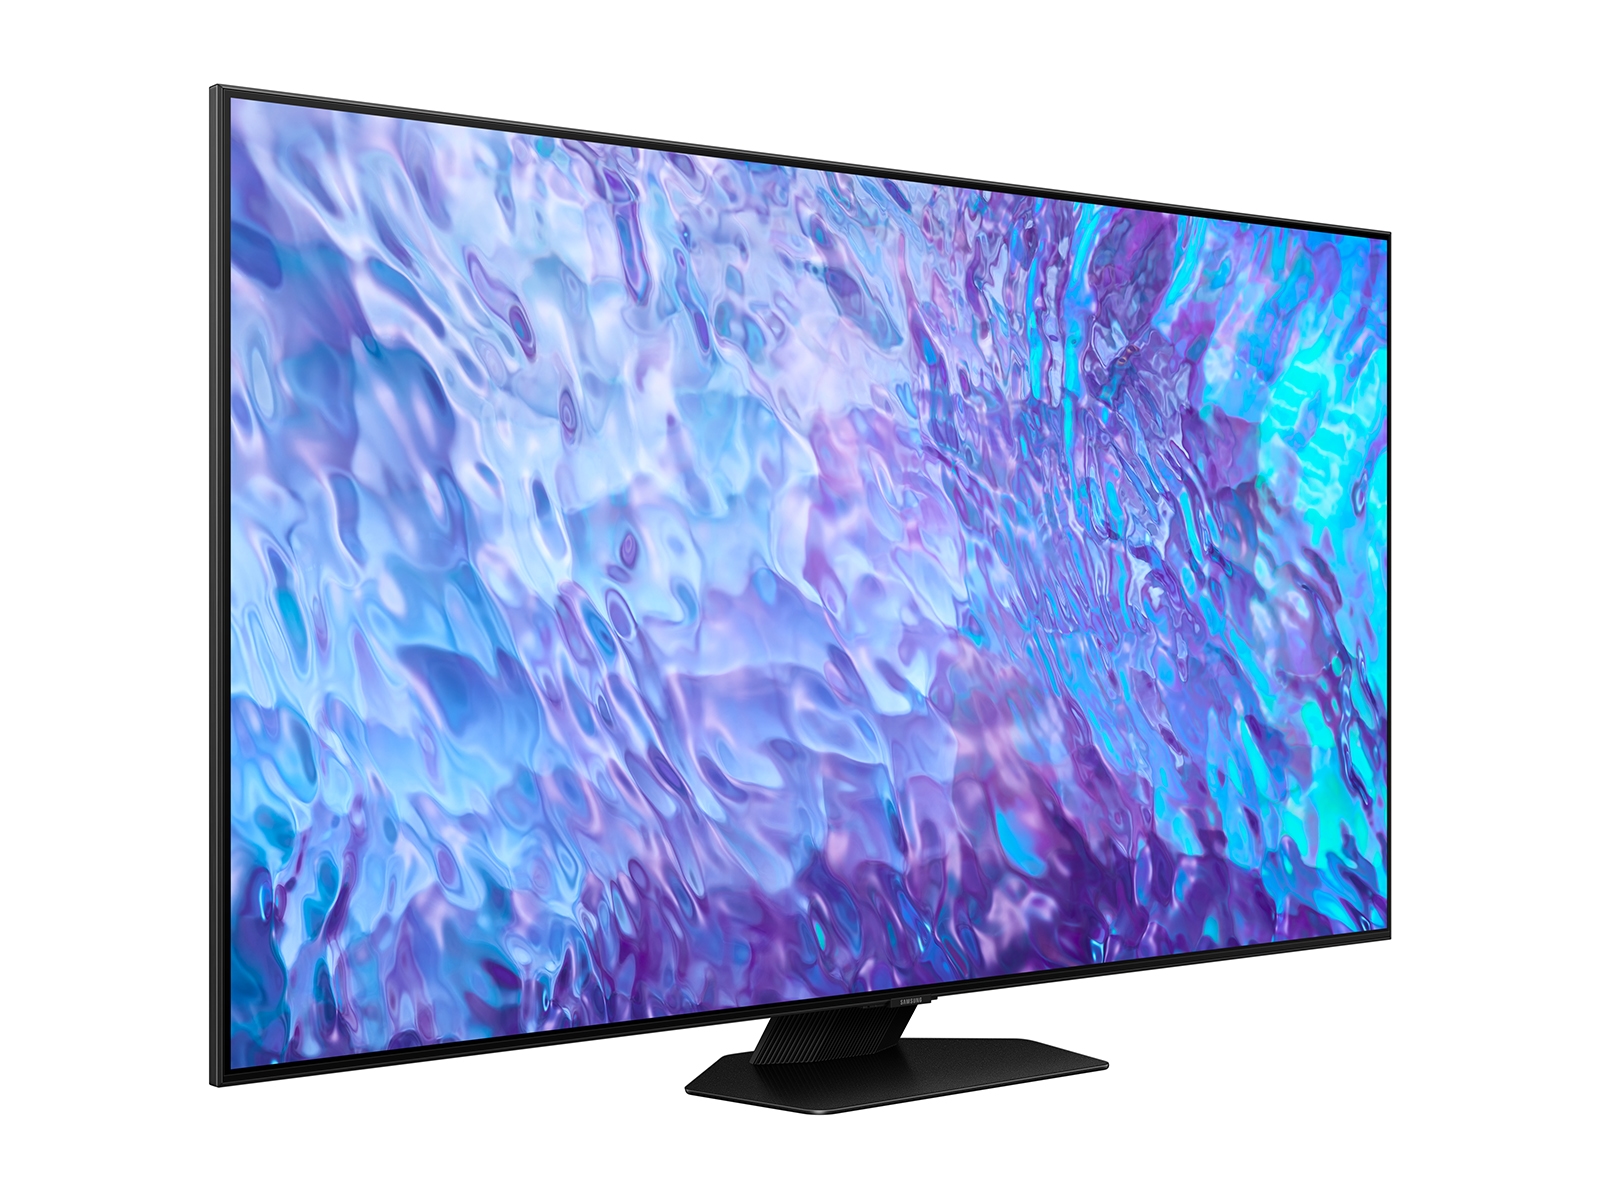 Bloom LED TV: high quality images and size to suit your needs